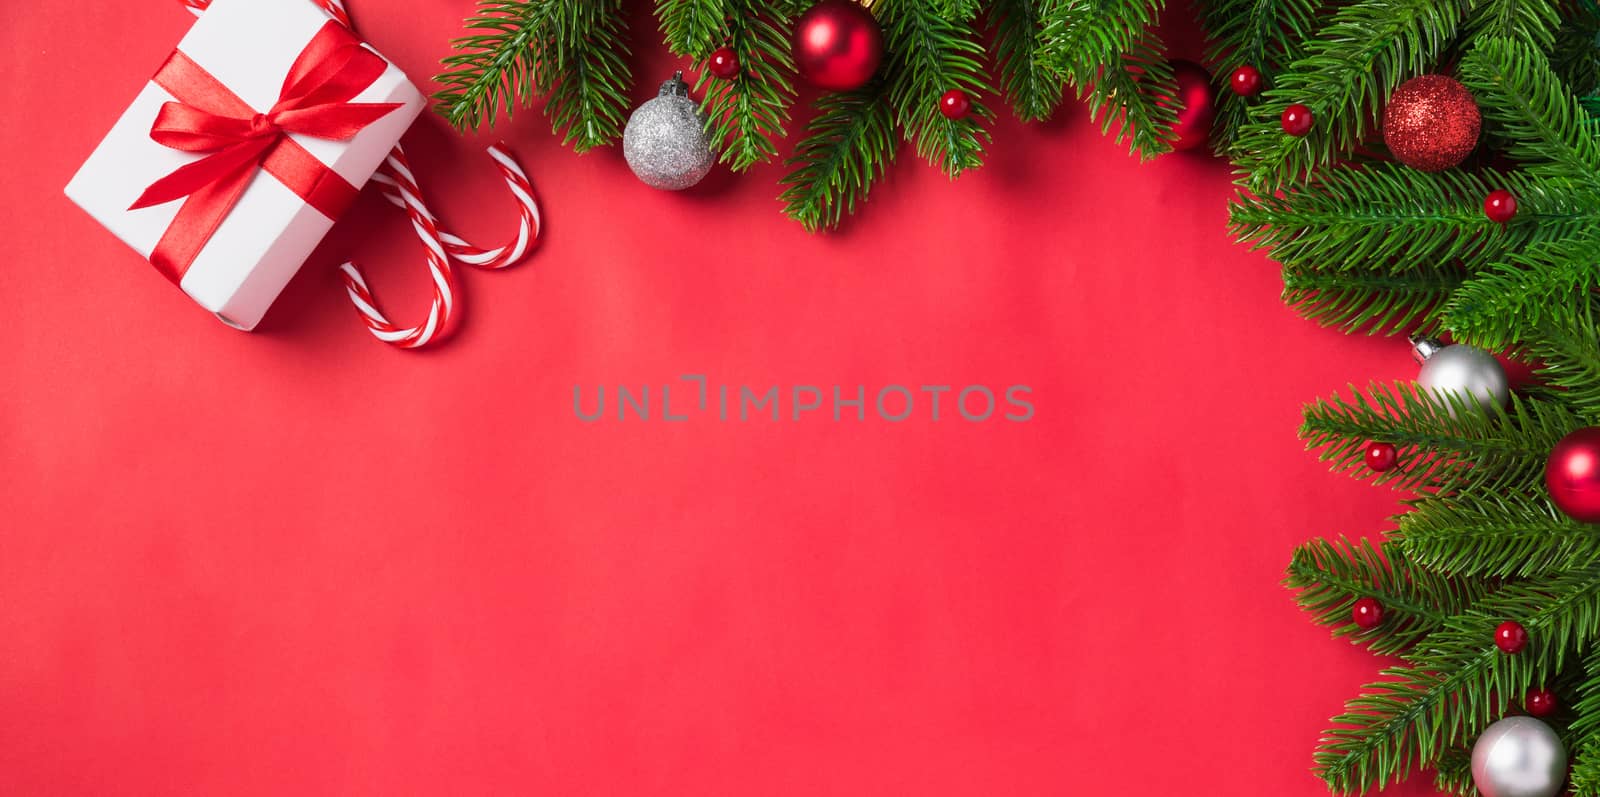 Christmas holiday background with gift box decorations composition, Top view fir green fir tree branches and Xmas ornaments gift box on a red table background, Happy New Year Day concept